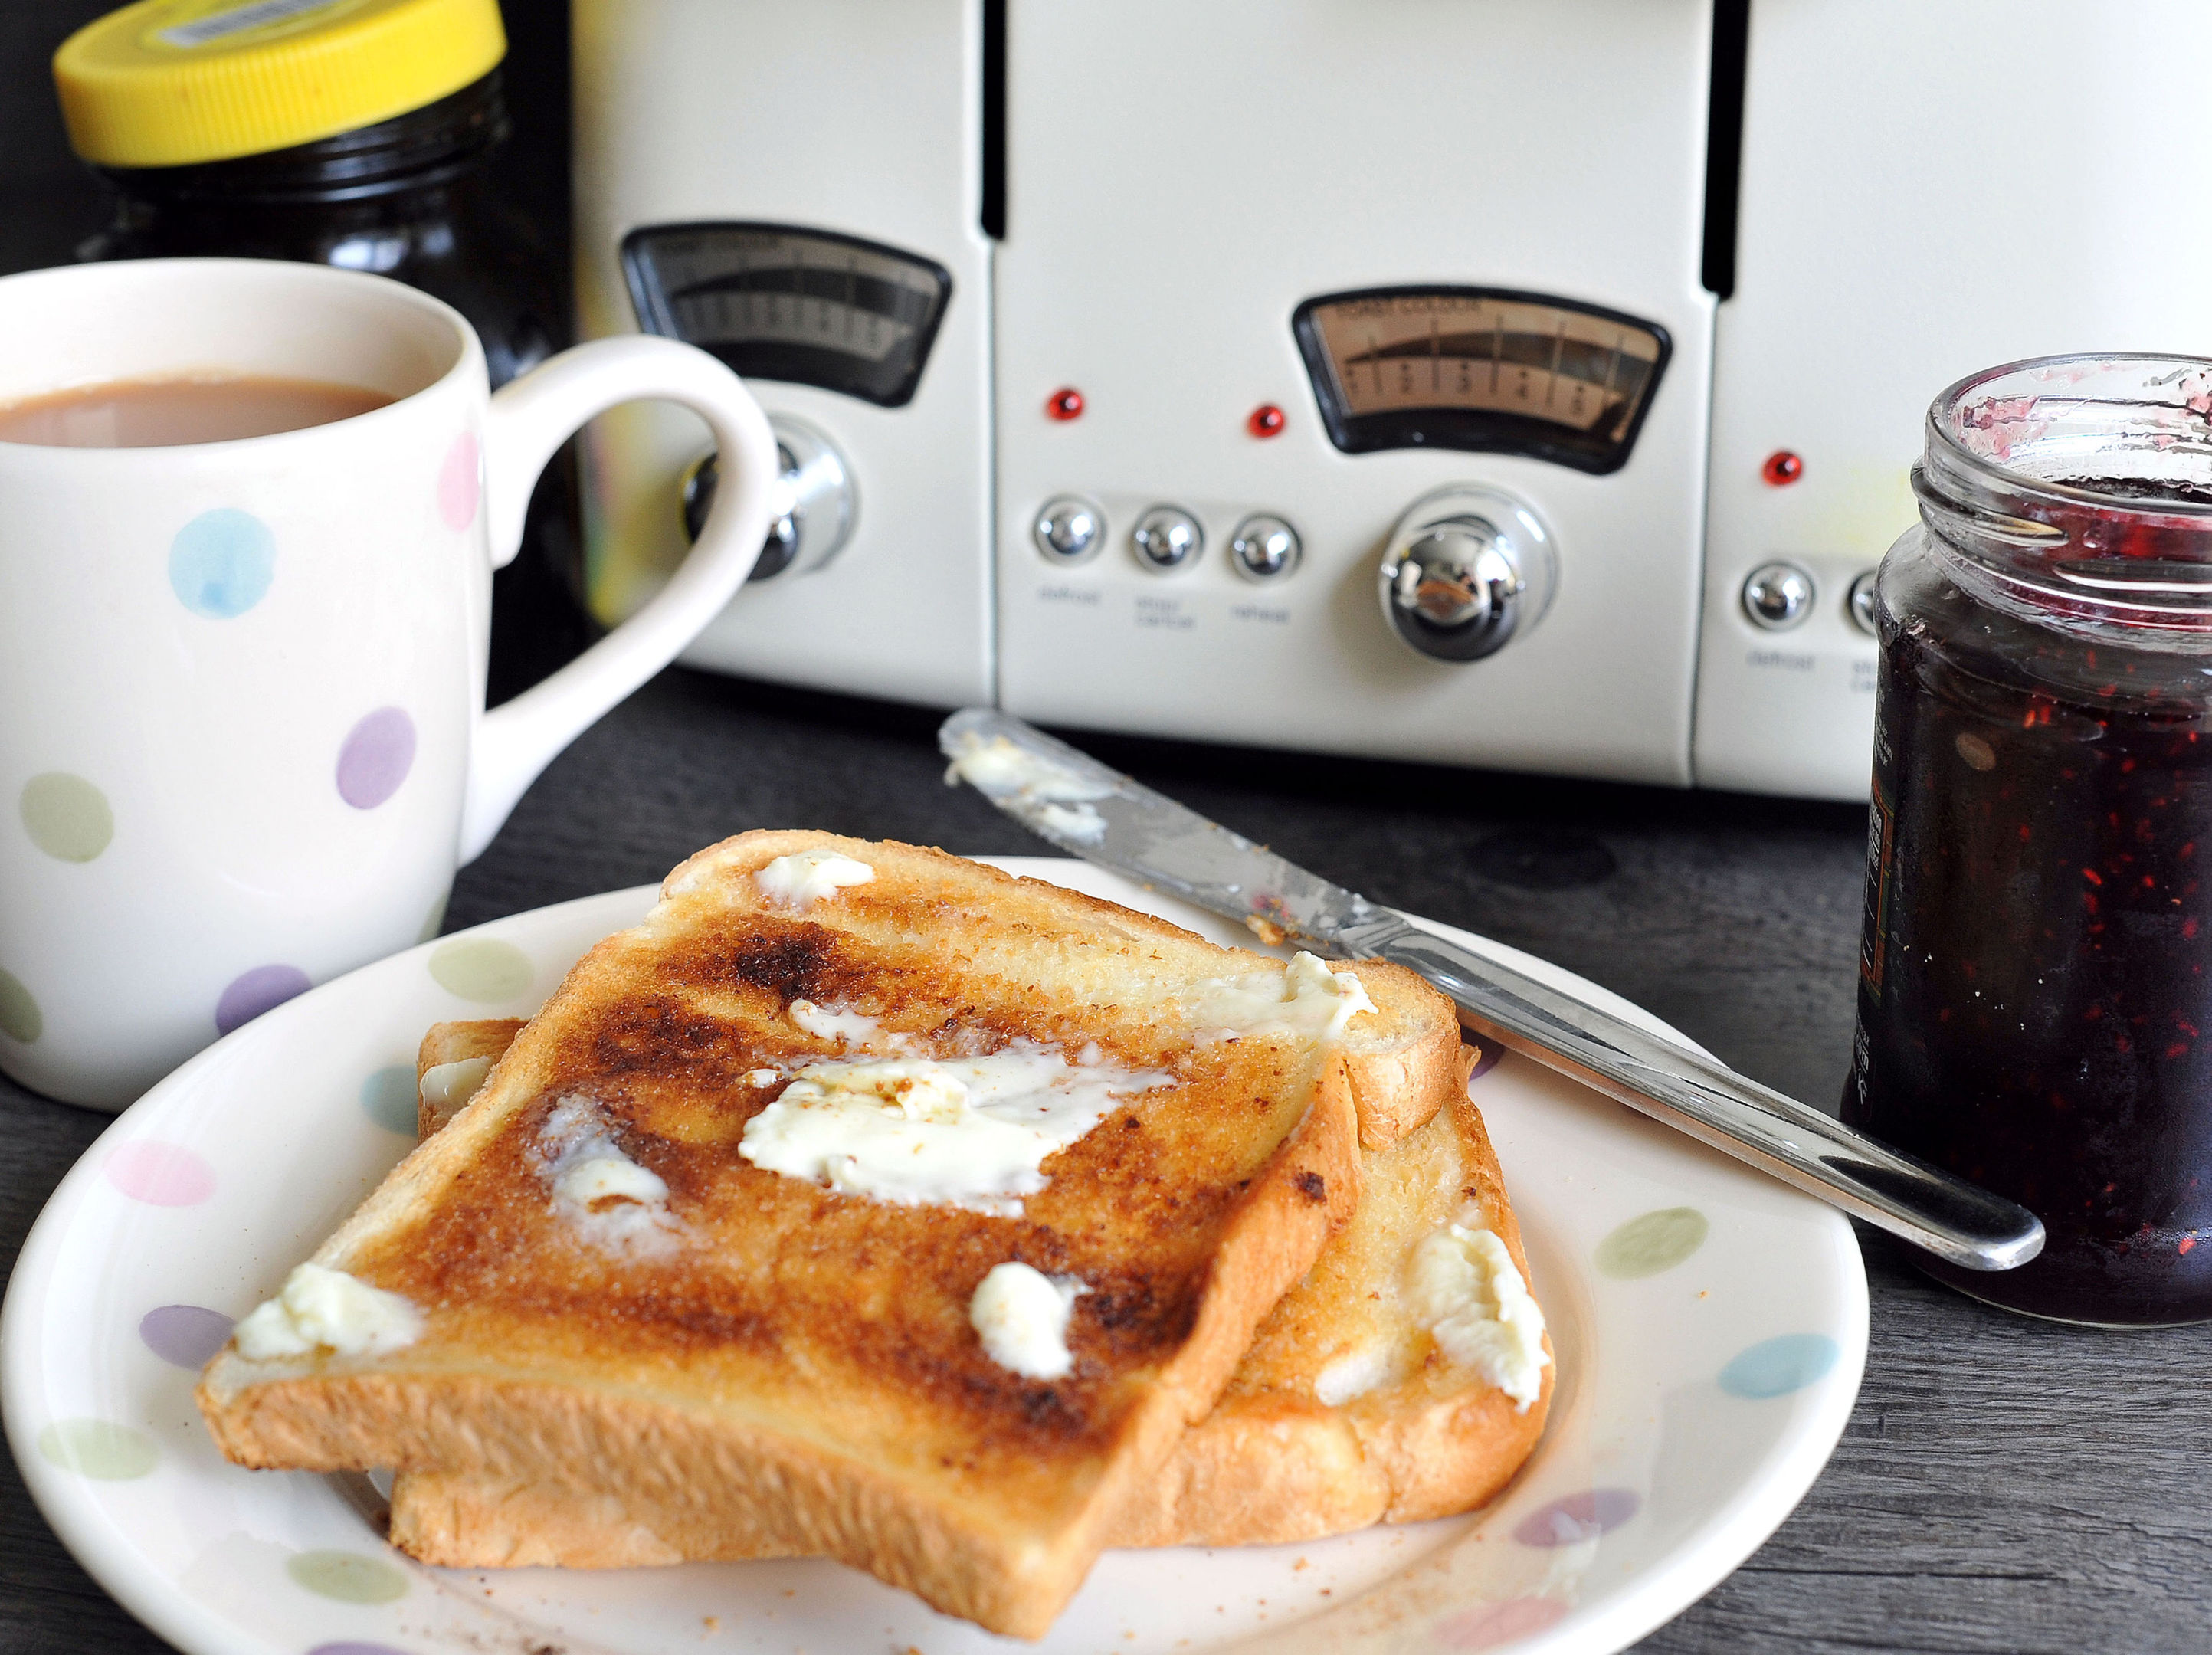 Police arrested a woman who had burnt her toast